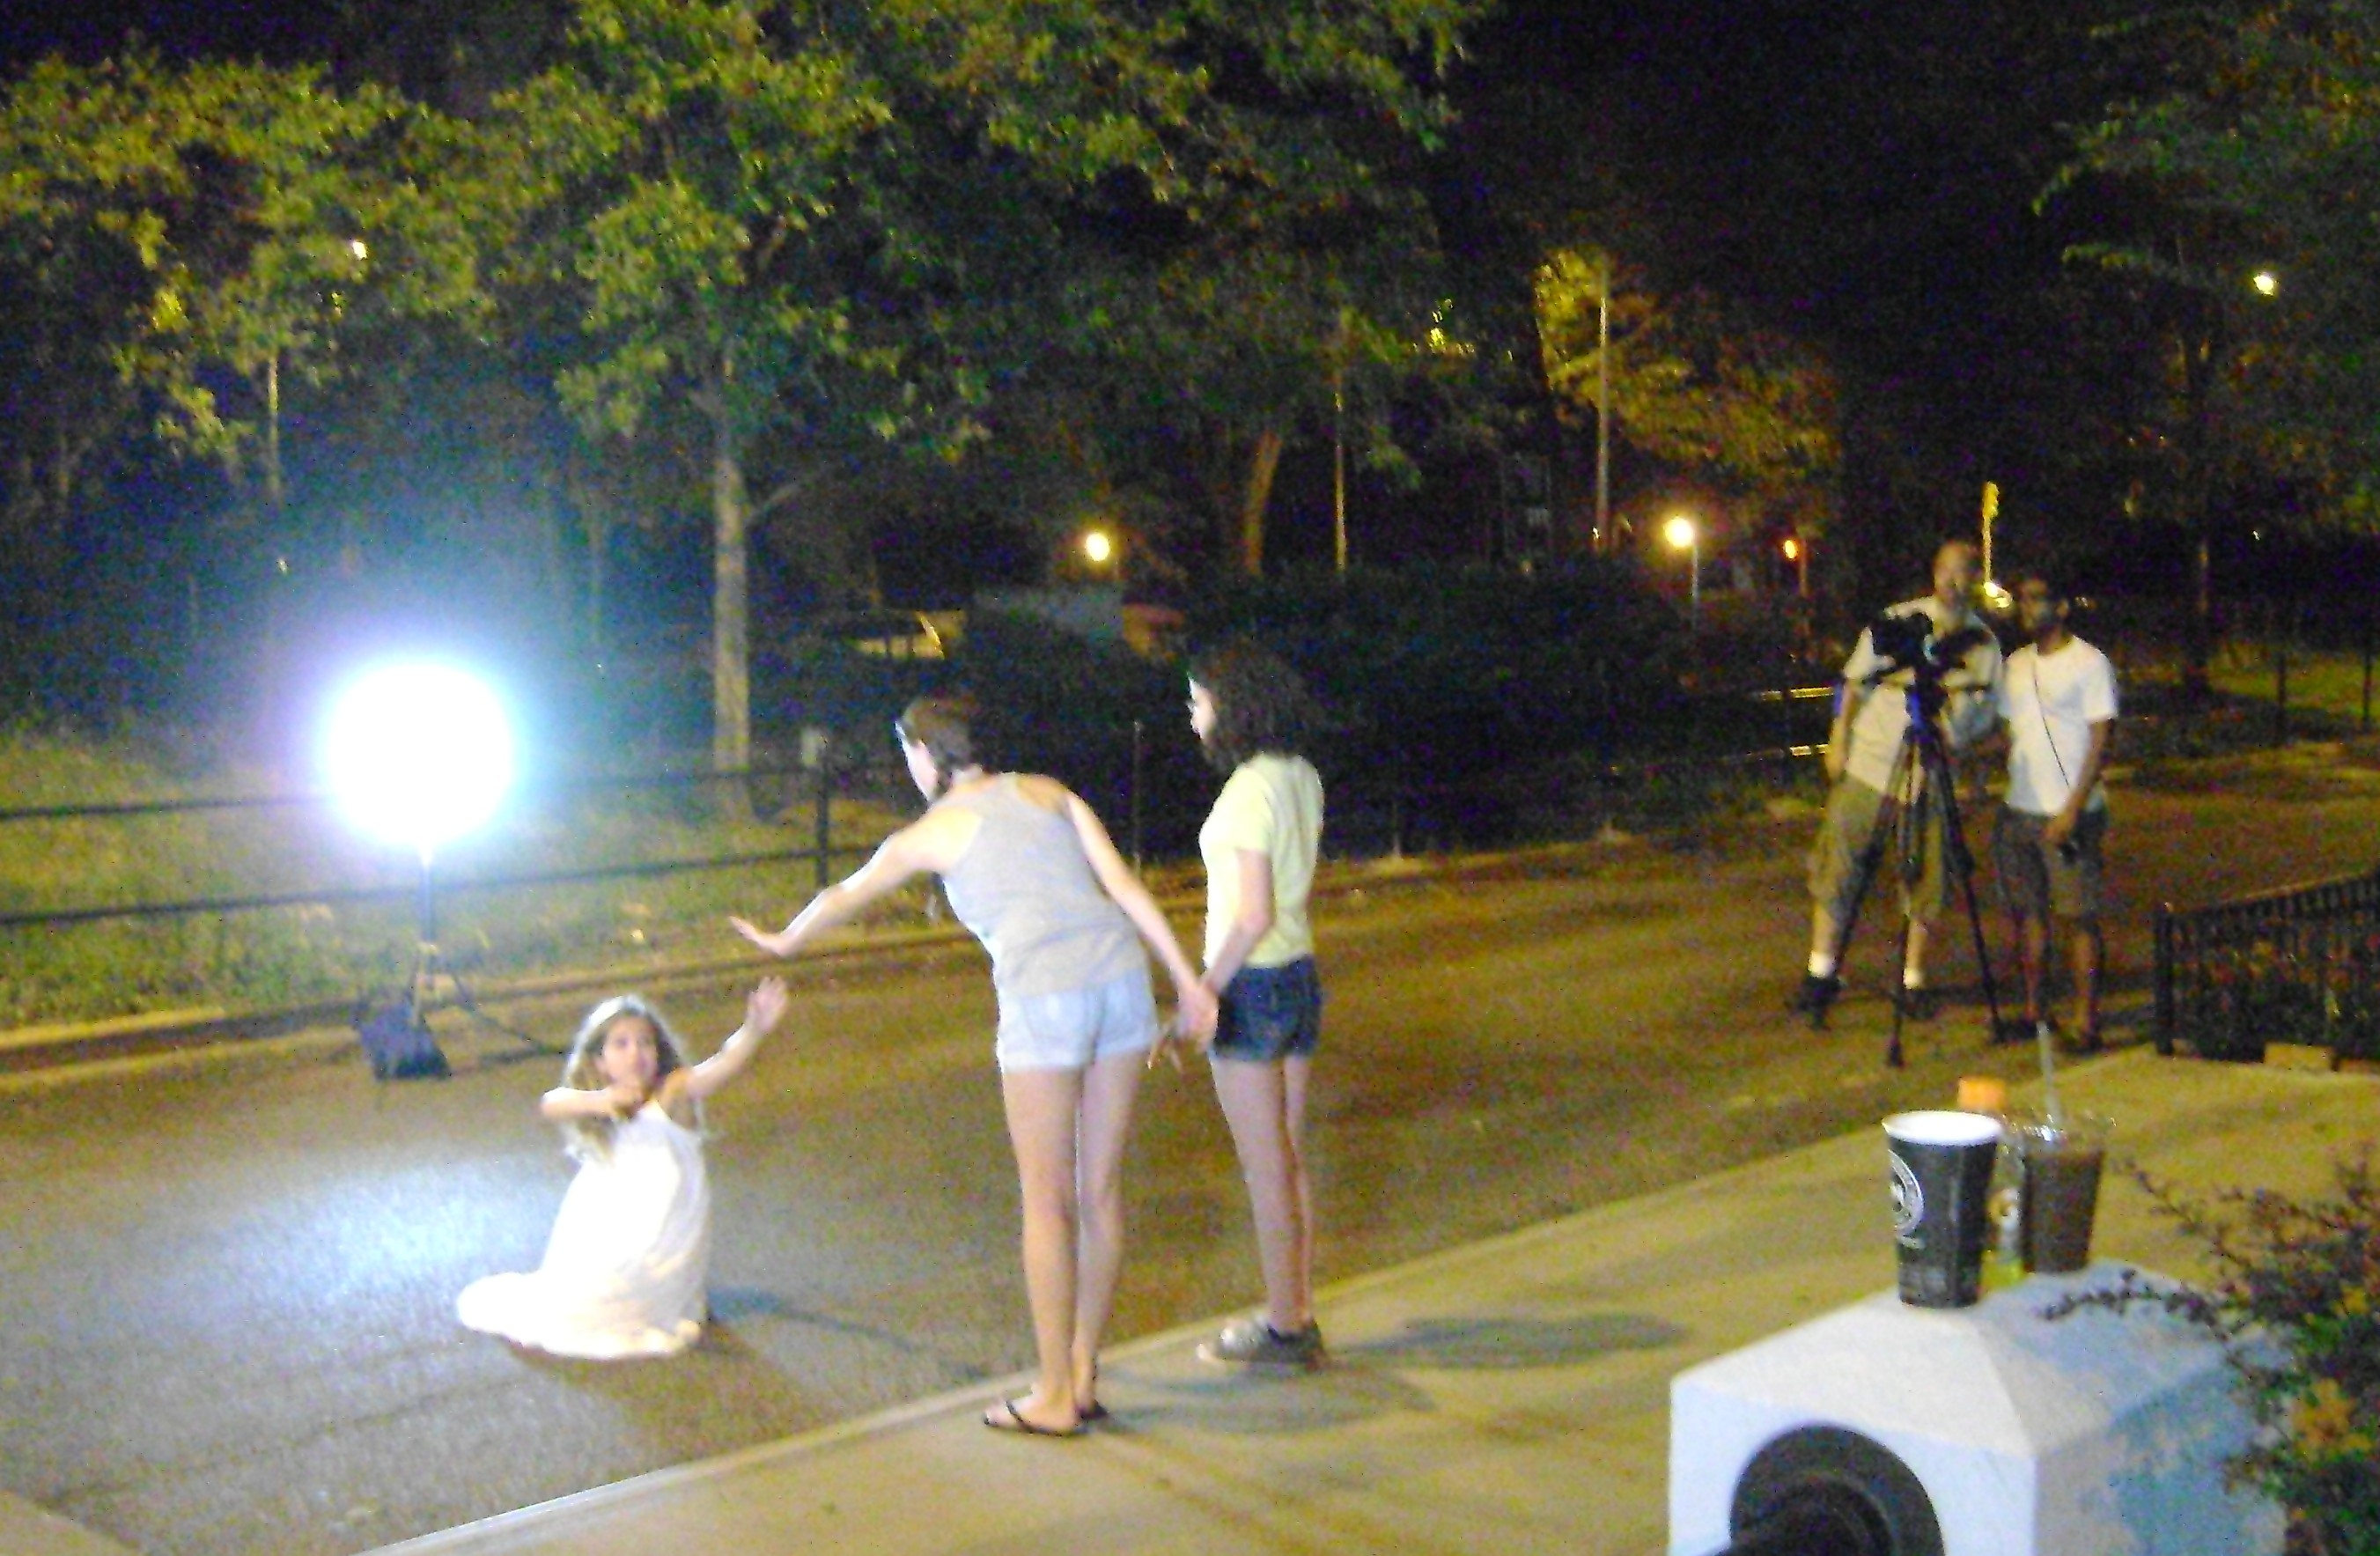 'Mercy Mercy Me' web series night shoot w/Director Mark Cabaroy, Producer Maria Rusolo & actresses Bridget M Clark & Emma L. Leila as Weeping Willow about to be run down by a car.